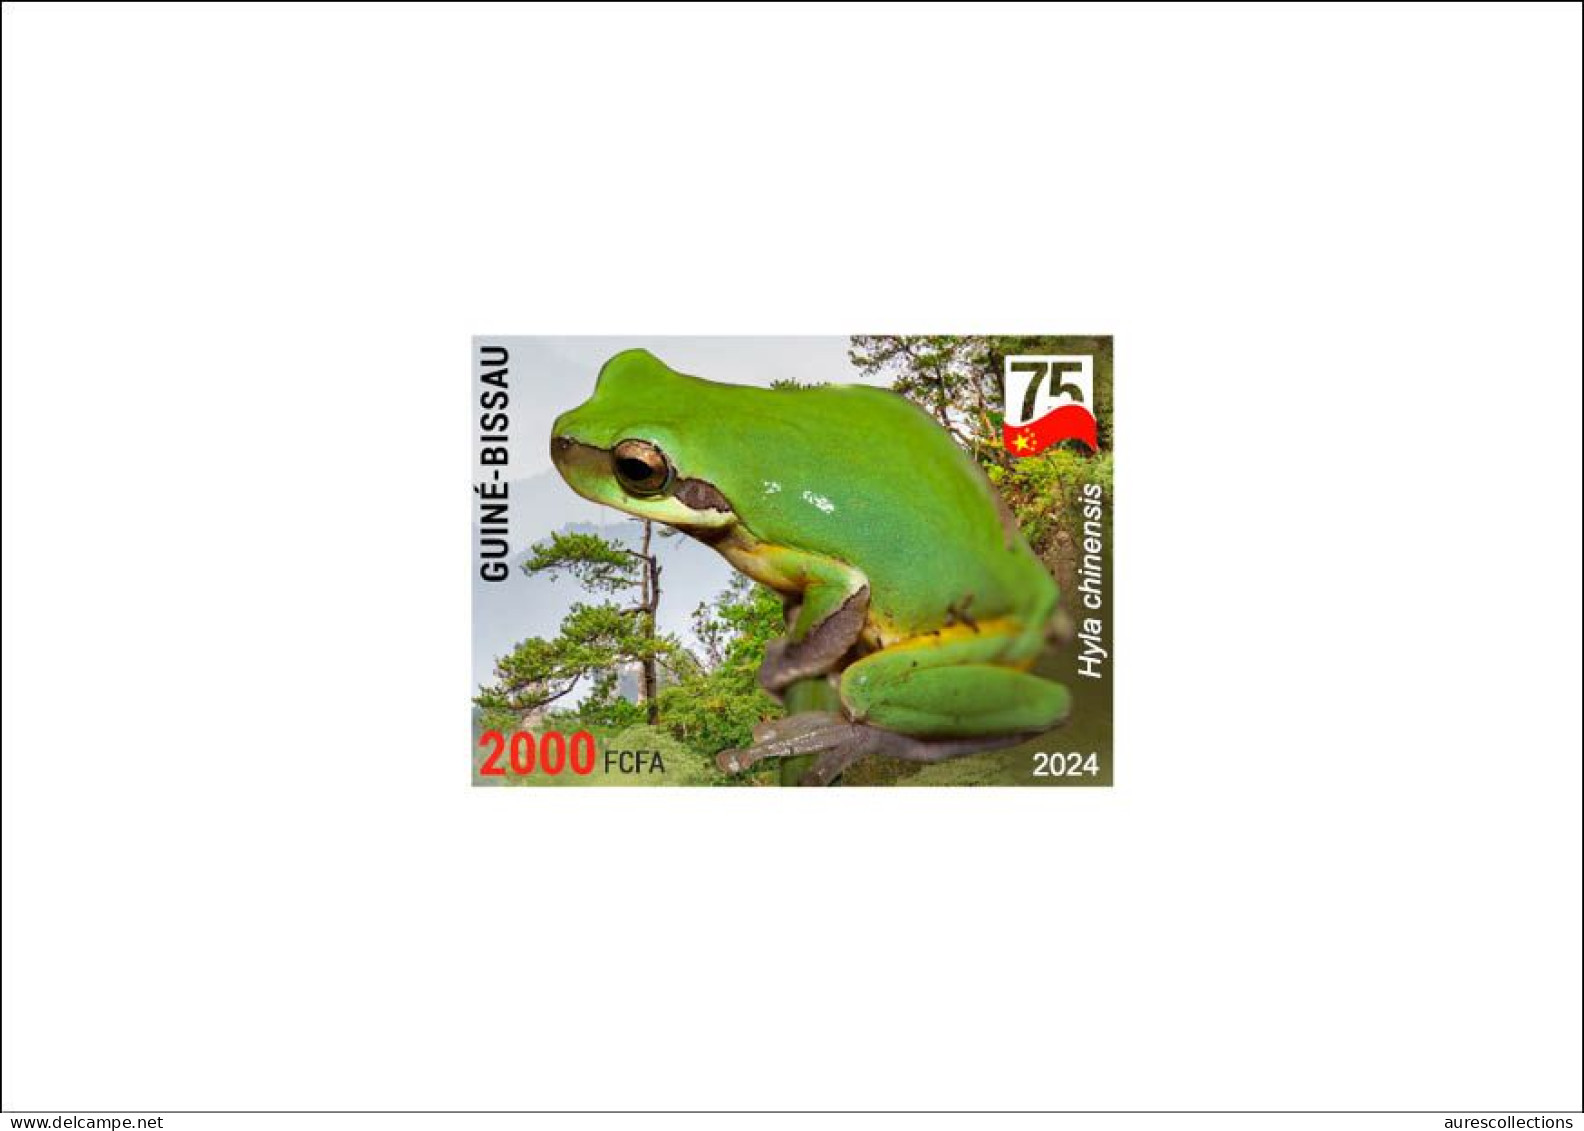 GUINEA BISSAU 2024 DELUXE PROOF - CHINA AMPHIBIANS & REPTILES - CHINESE TREE FROG FROGS GRENOUILLES - CHINA 75 ANNIV. - Grenouilles